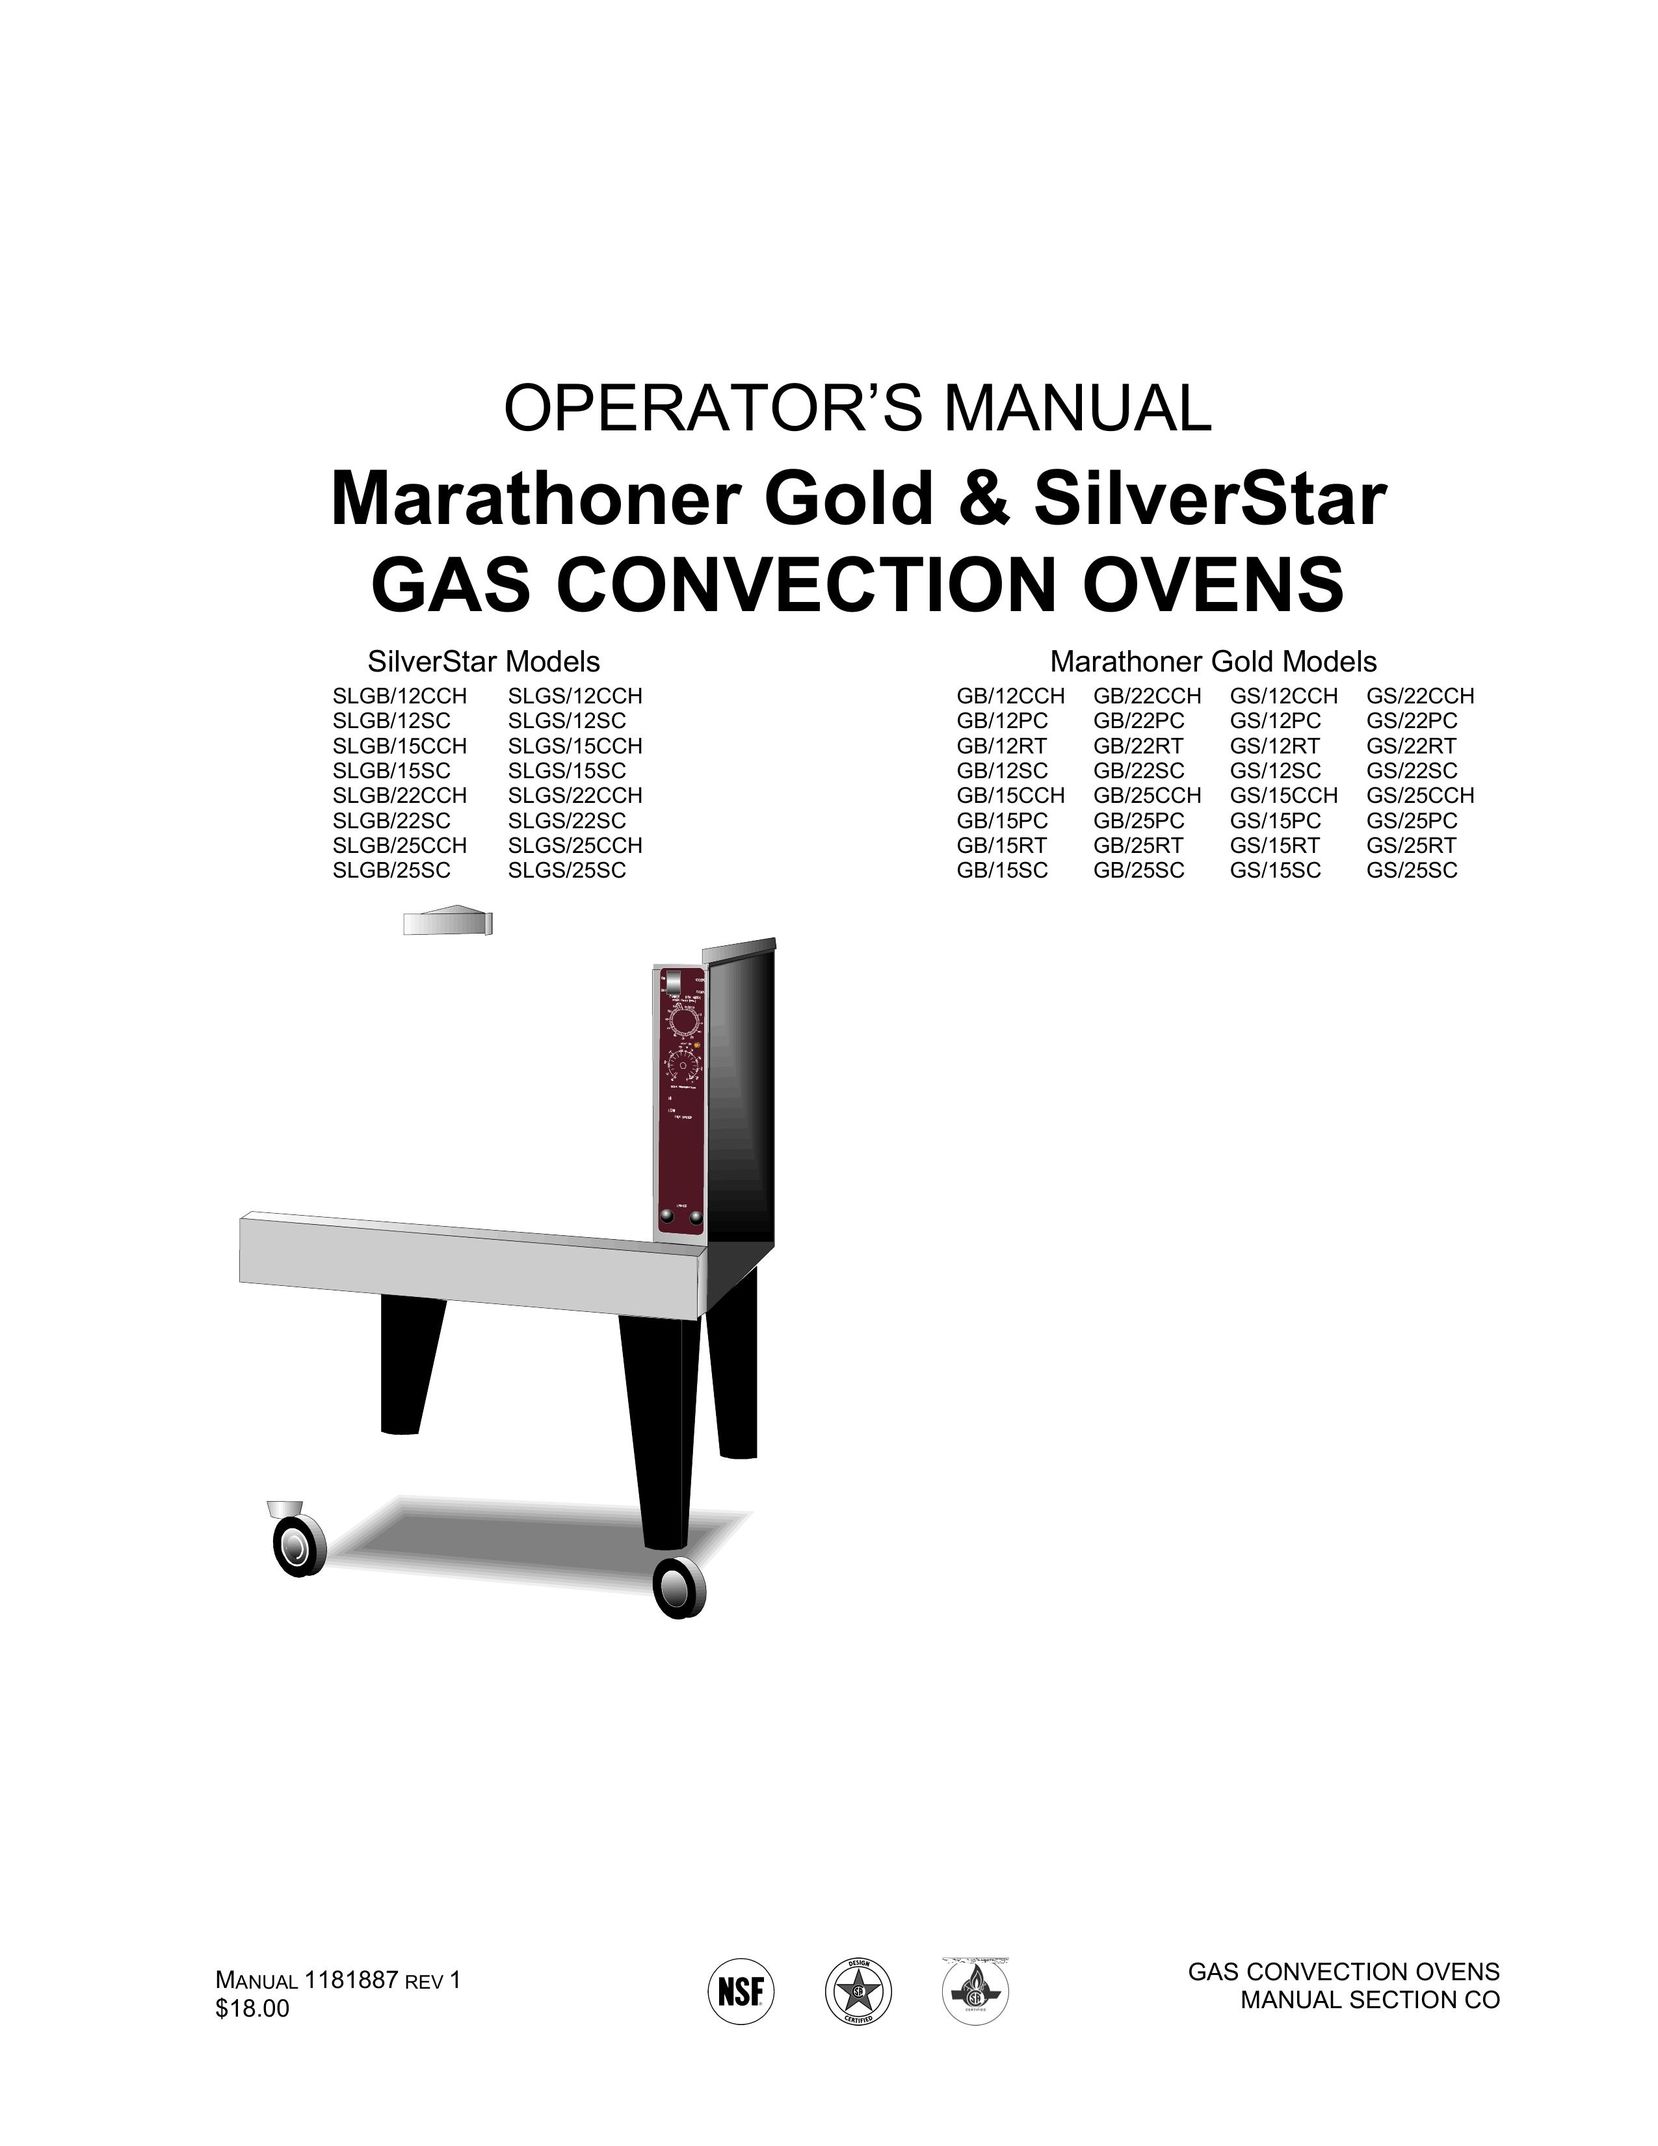 Southbend SLGB/25CCH Oven User Manual